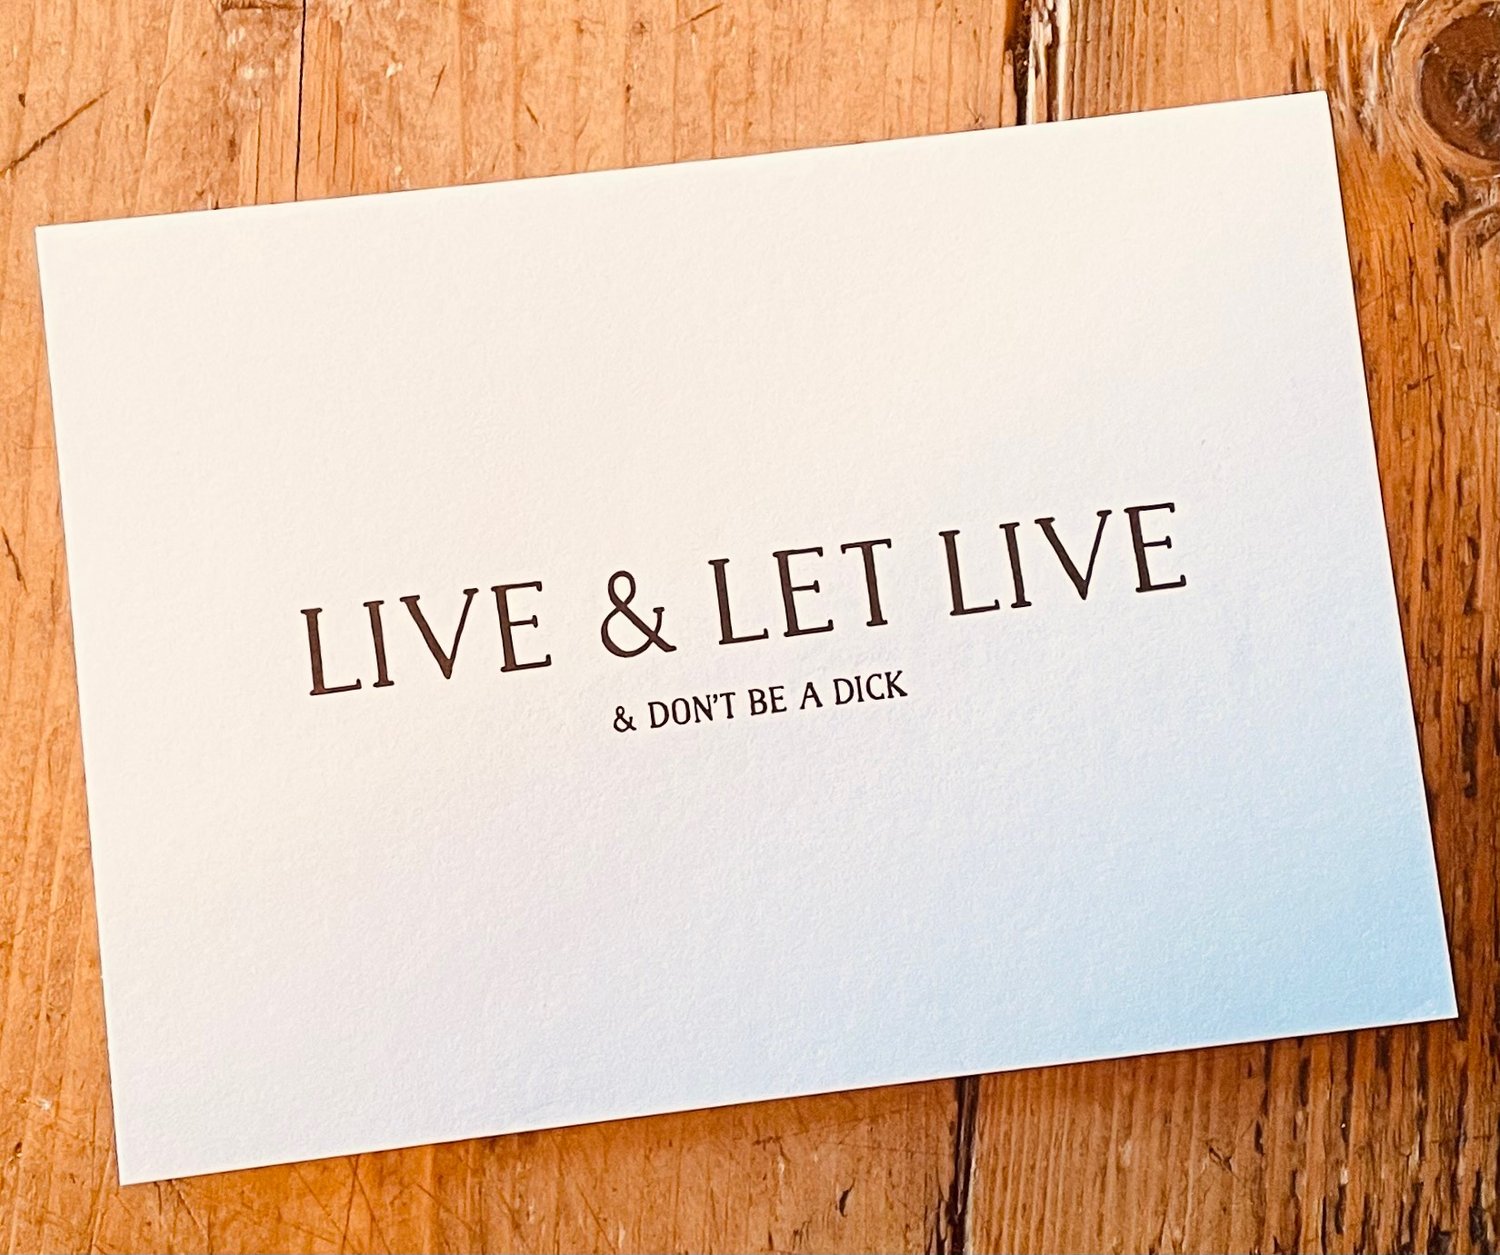 Image of Live & let live & don’t be a dick